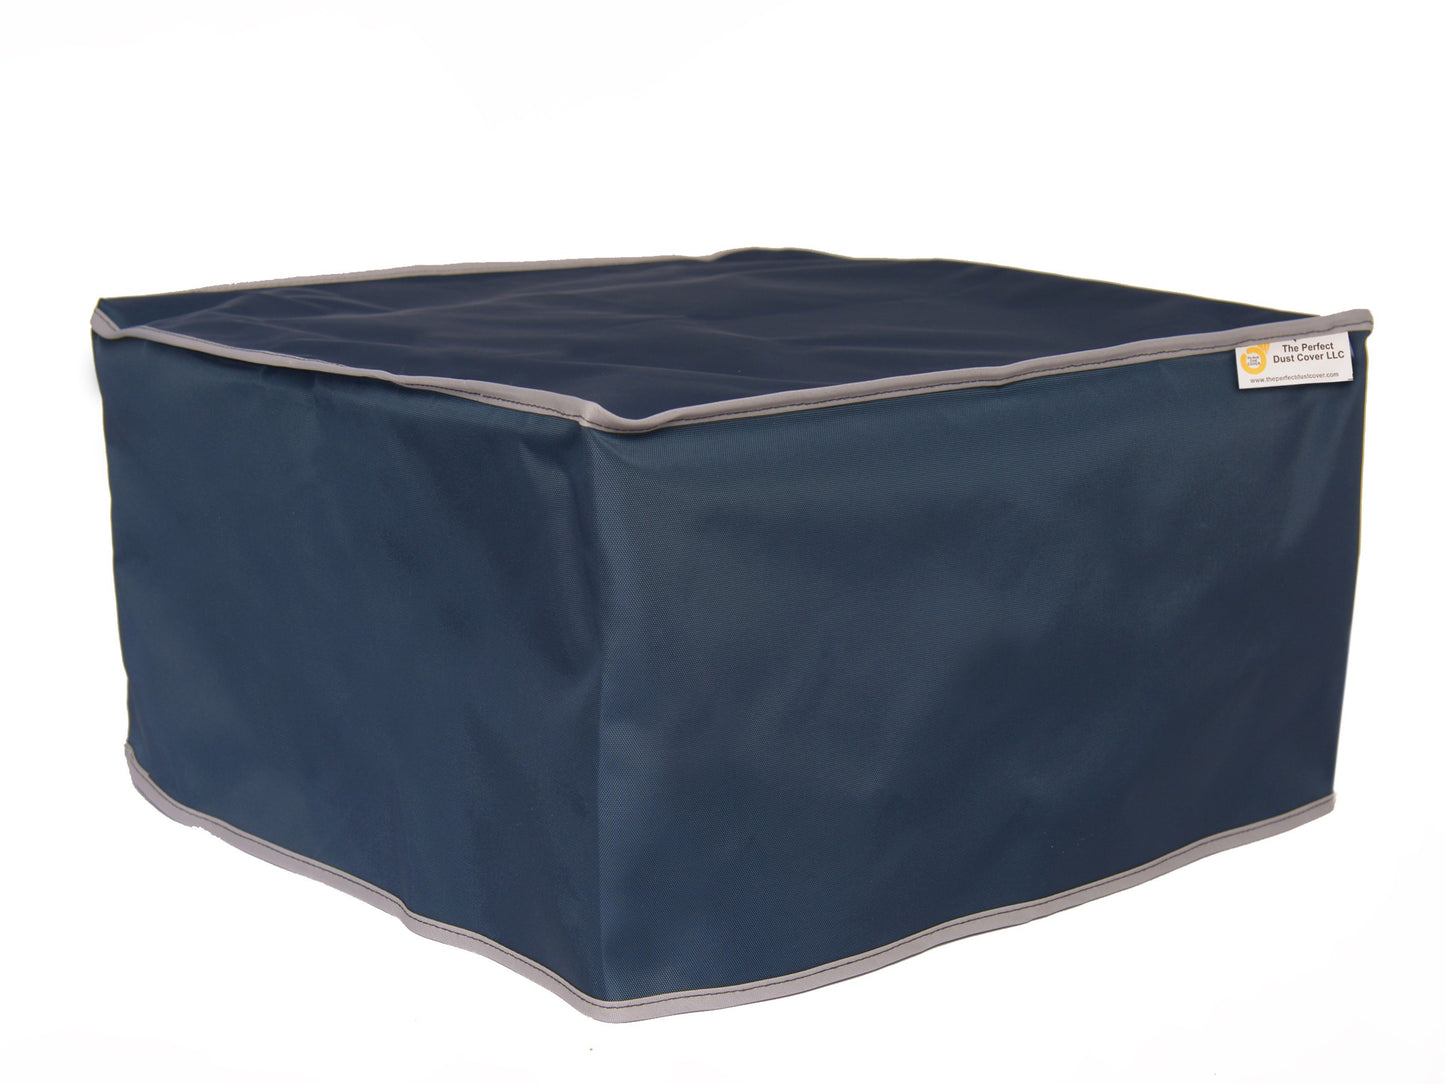 The Perfect Dust Cover, Navy Blue Nylon Cover Compatible with Brother MFC-L8900CDW Color Laser Printer with Lower Paper Tray (500 sheet capacity), Anti Static and Waterproof Dust Cover Dimensions 19.5''W x 20.7''D x 26.8''H by Perfect Dust Cover